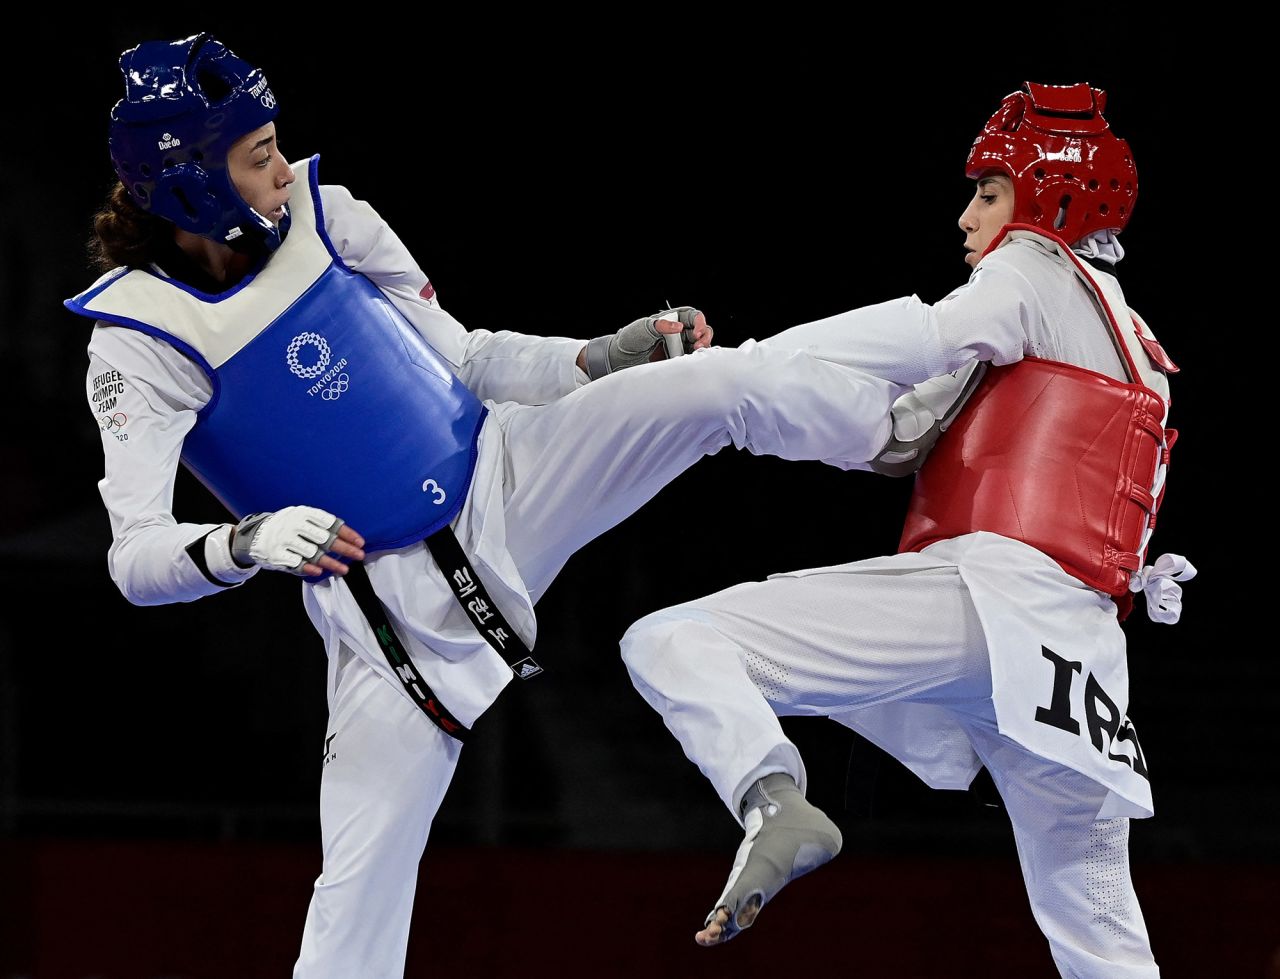 Kimia Alizadeh, a taekwondo athlete representing the Olympic Refugee Team, kicks Iran's Nahid Kiyani Chandeh during her first match on July 25. Alizadeh was born in Iran and became the country's first female athlete to win an Olympic medal when she won bronze at the 2016 Games. But <a href="https://edition.cnn.com/2021/03/03/sport/kimia-alizadeh-tokyo-olympics-iran-white-flag-refugee-spt-intl/index.html" target="_blank">she defected last year</a> amid searing criticism of the regime in Tehran. Alizadeh defeated Chandeh 18-9.